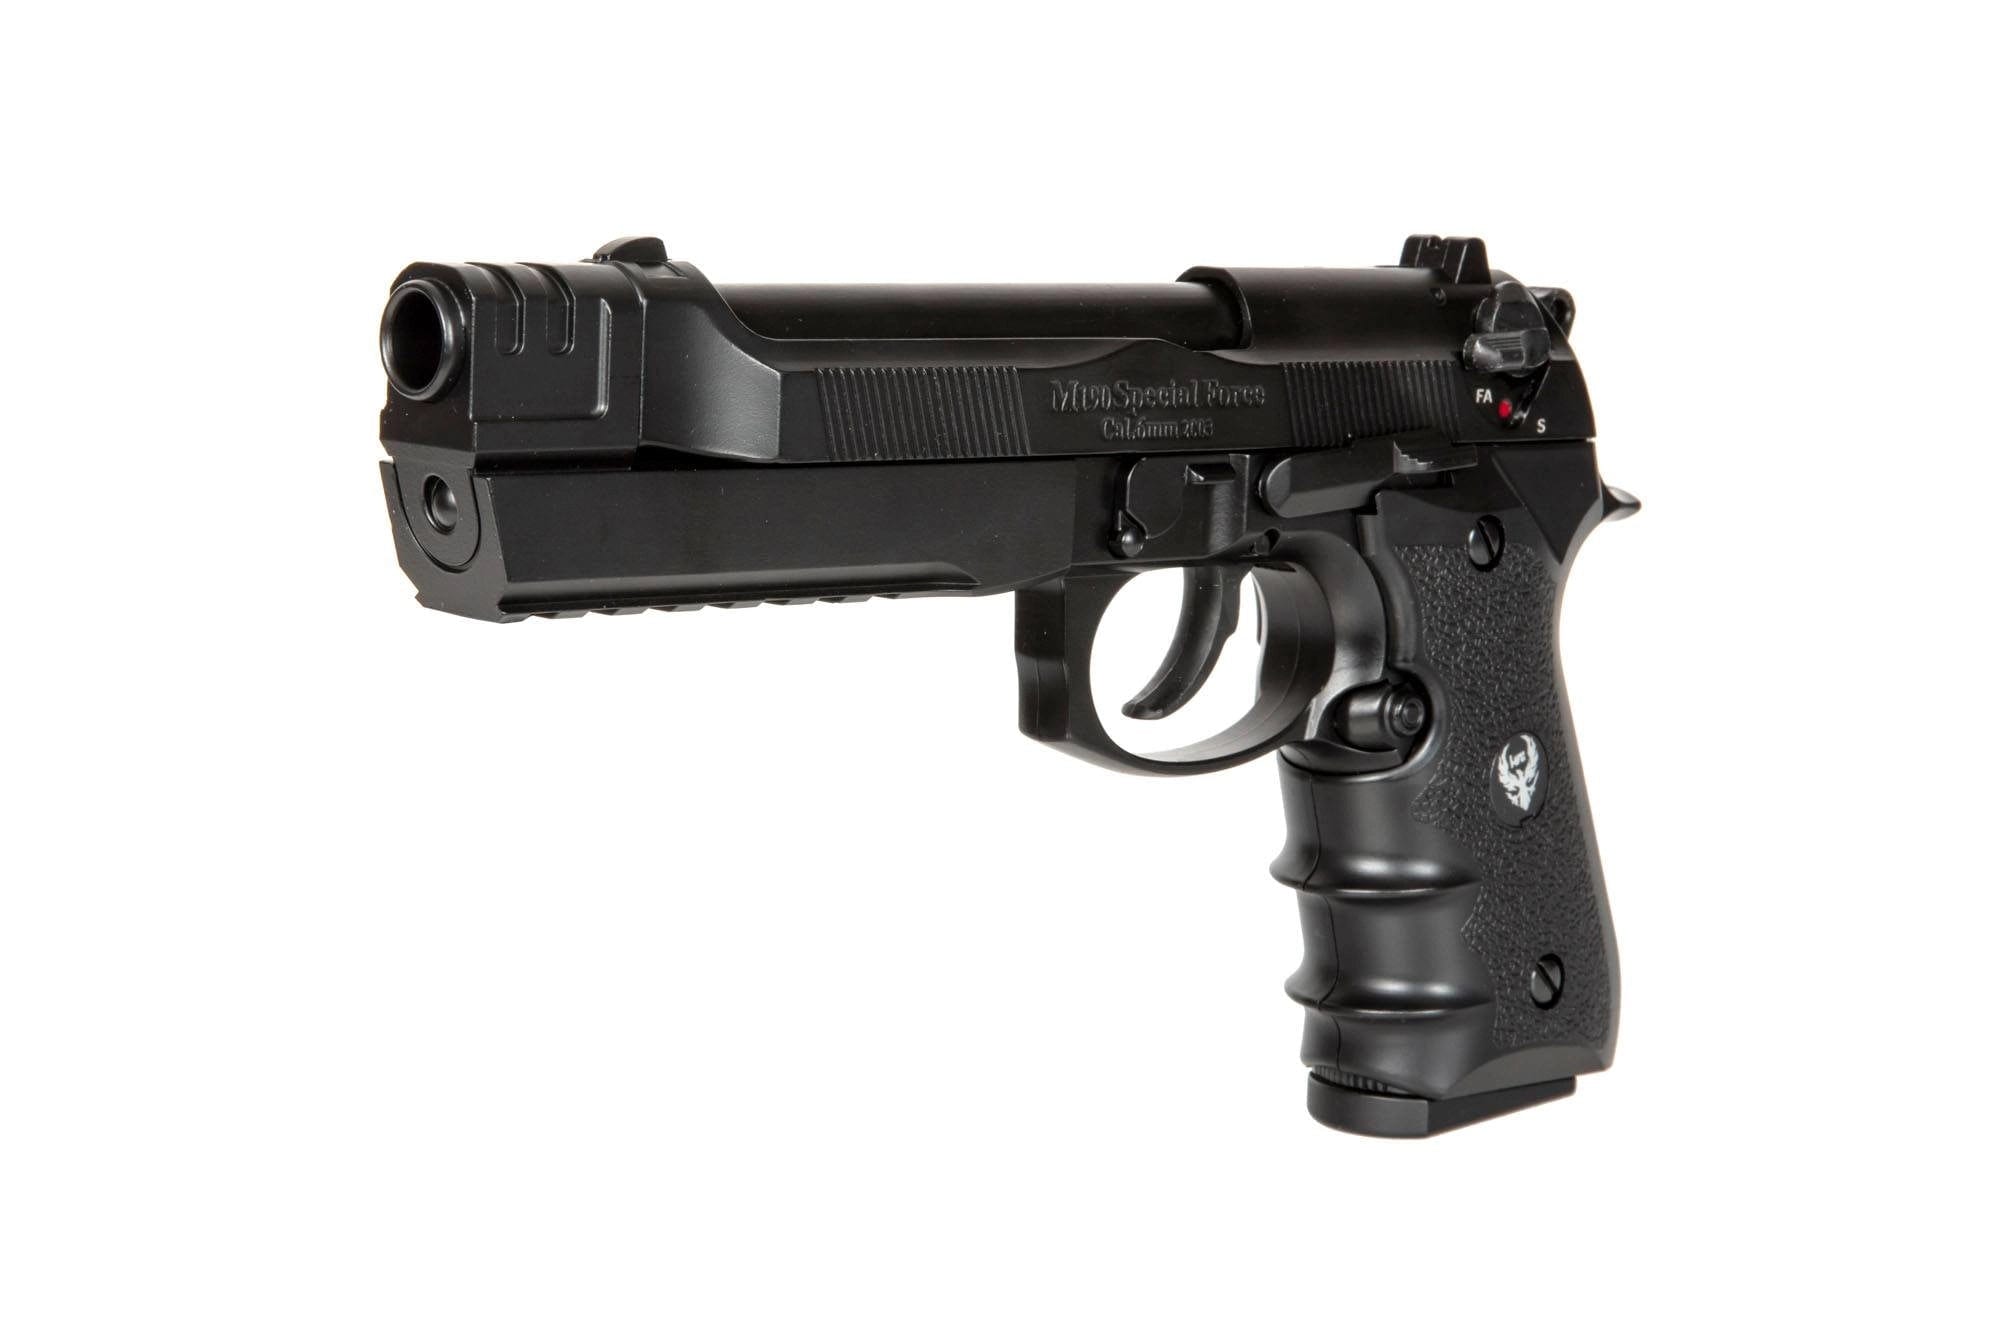 PISTOLA FULL METAL AIRSOFT (HG-199) GAS BLOW BACK CON MALETIN